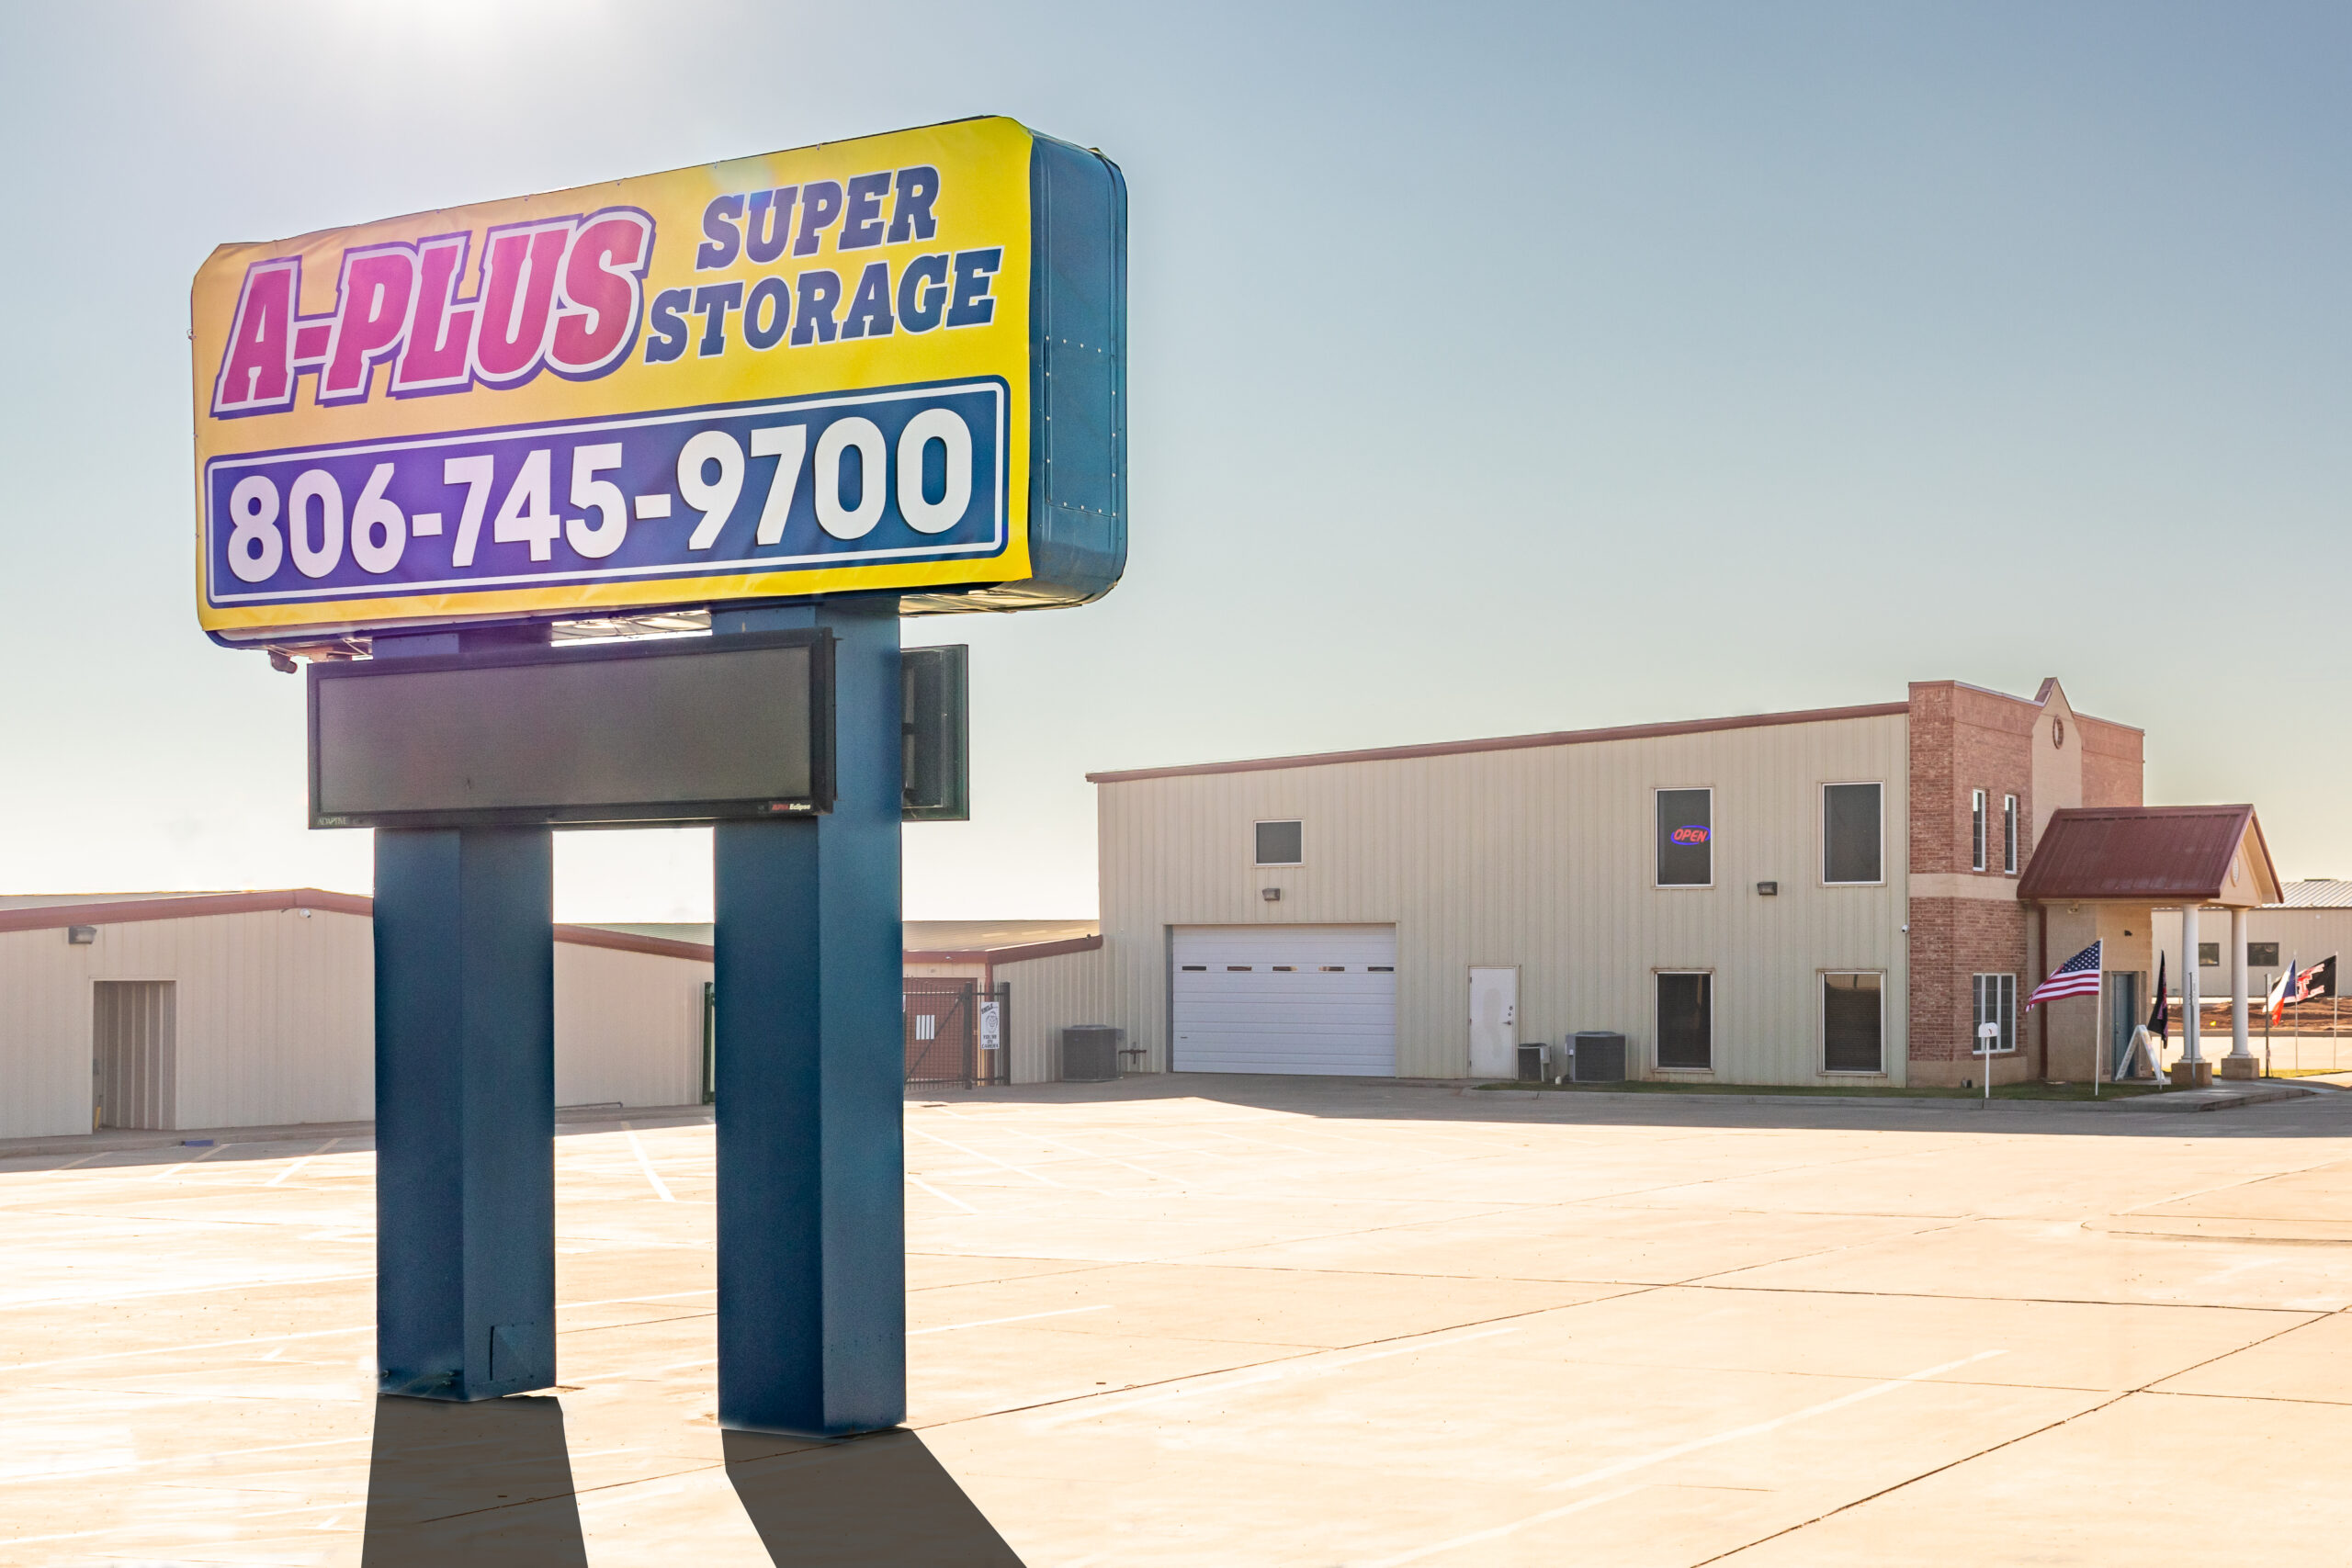 A Plus Super Storage at 120th & Indiana in Lubbock.